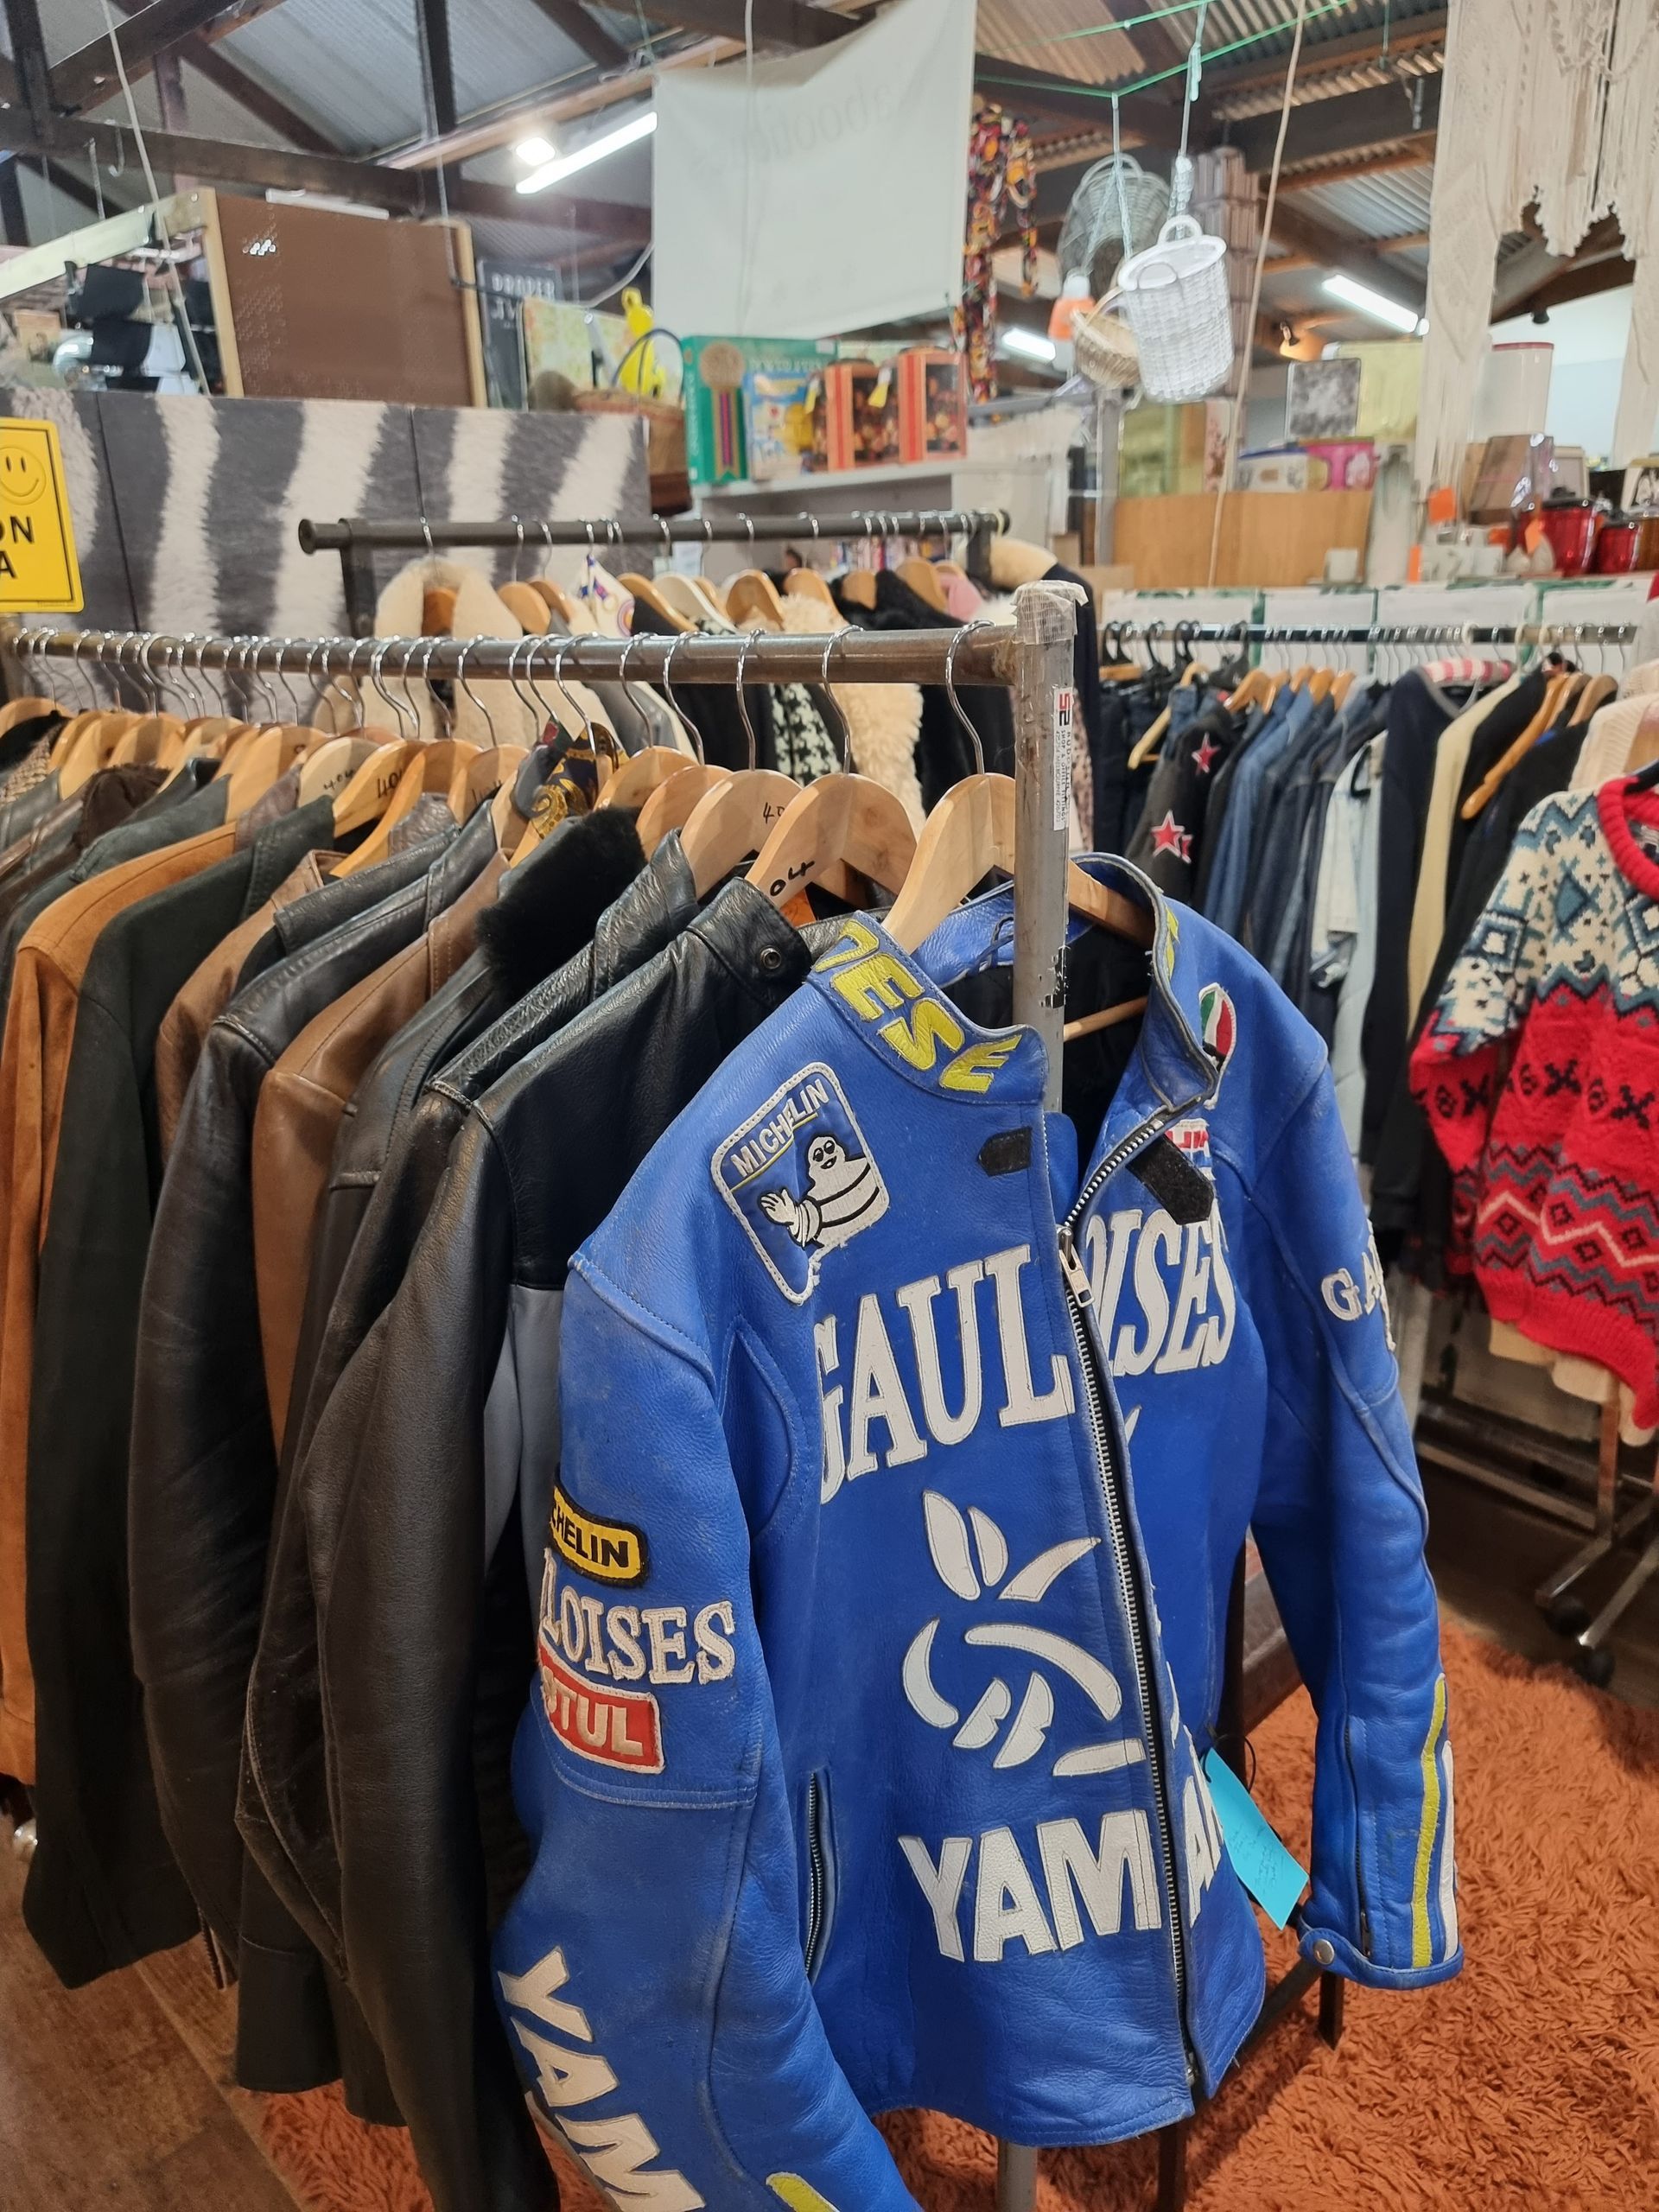 Clothing and Accessories - Vintage & Collectables Market in Ballarat